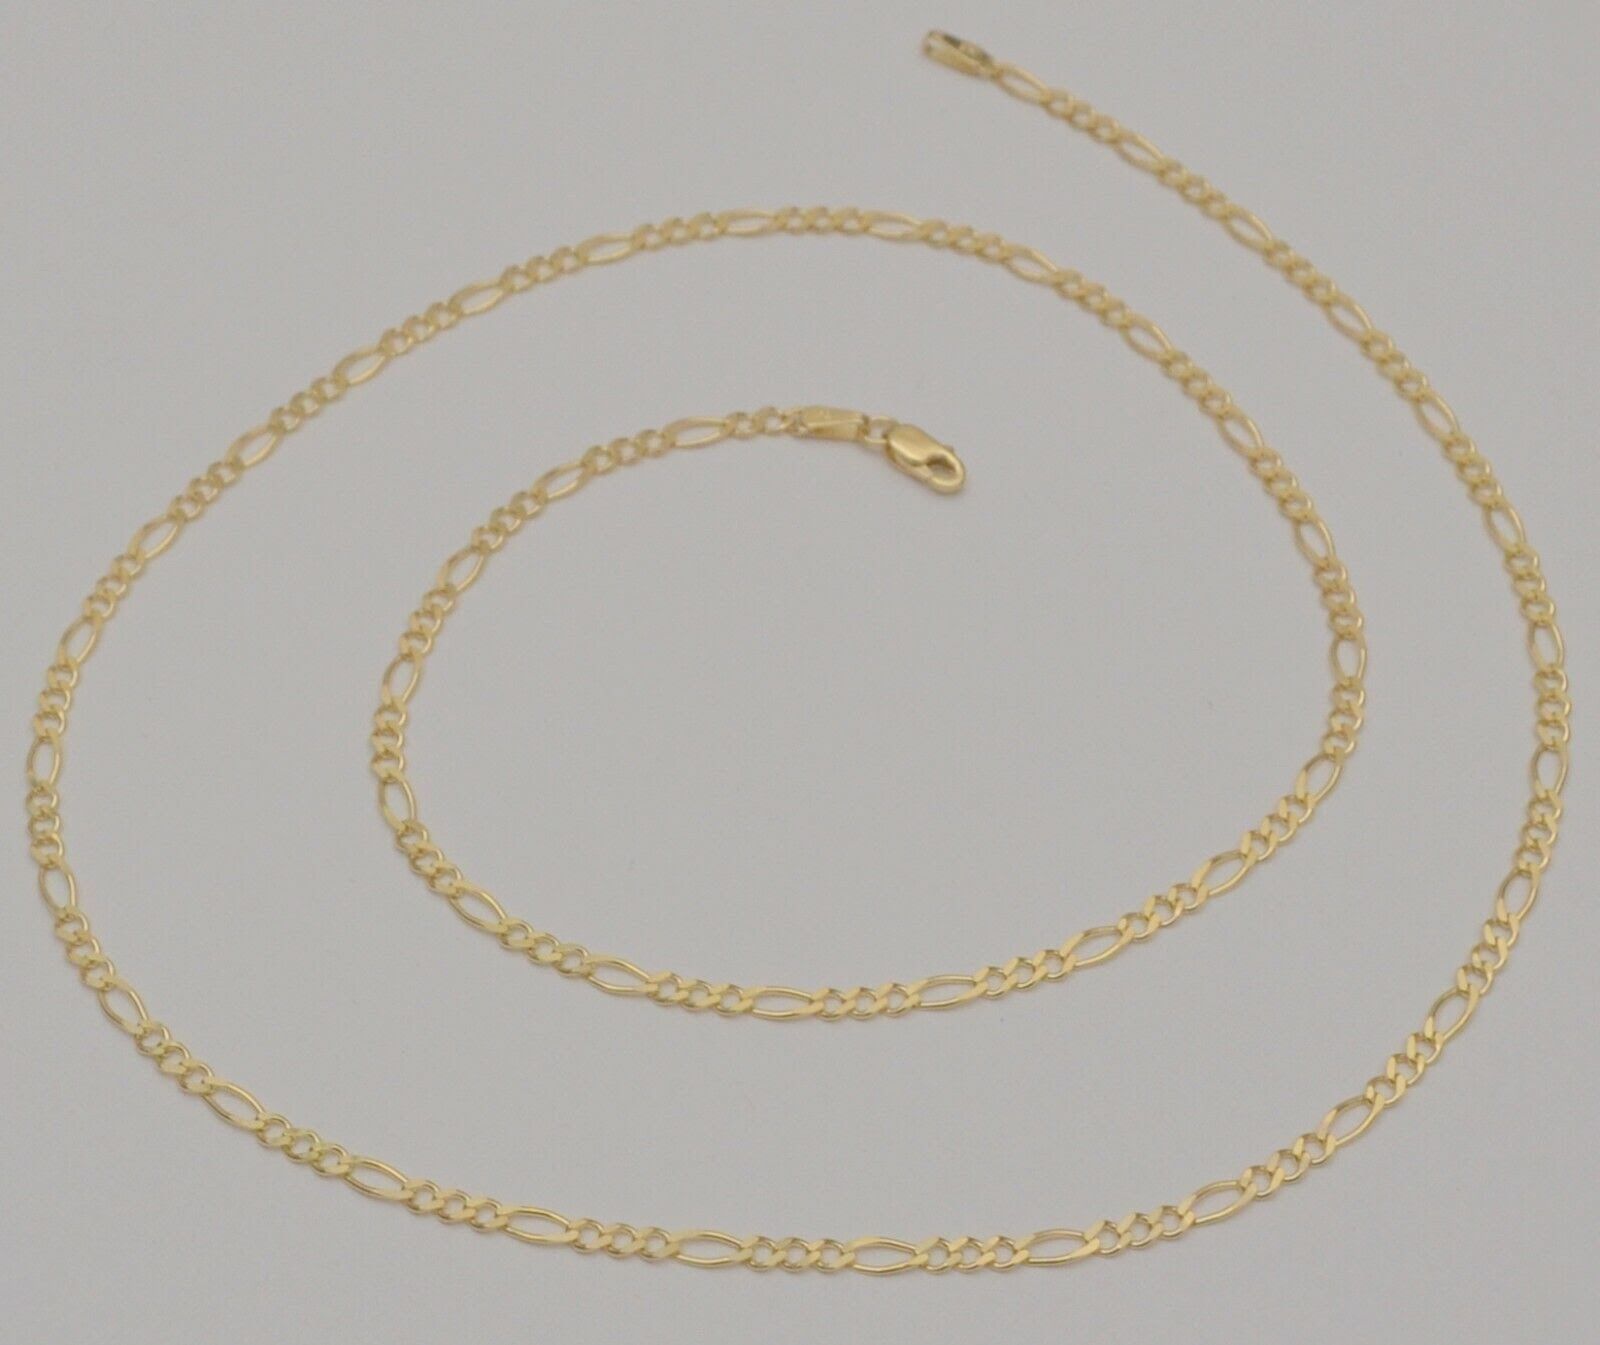 14k Solid Yellow Gold Figaro Link Chain Necklace 20 Inches 5.1 Gr 2.6 mm